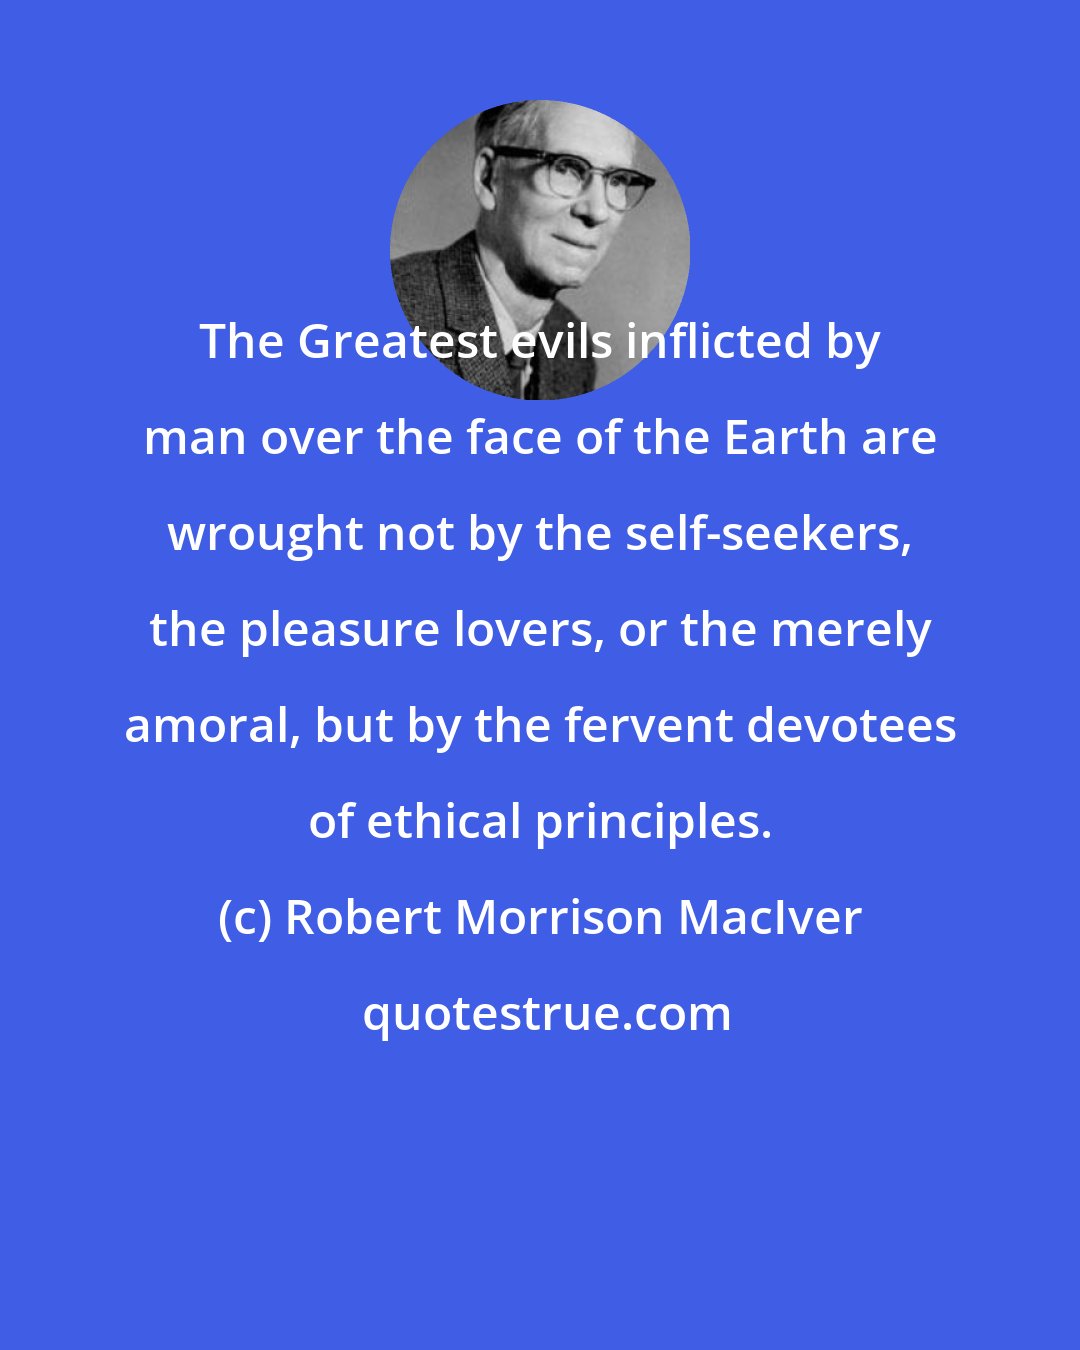 Robert Morrison MacIver: The Greatest evils inflicted by man over the face of the Earth are wrought not by the self-seekers, the pleasure lovers, or the merely amoral, but by the fervent devotees of ethical principles.